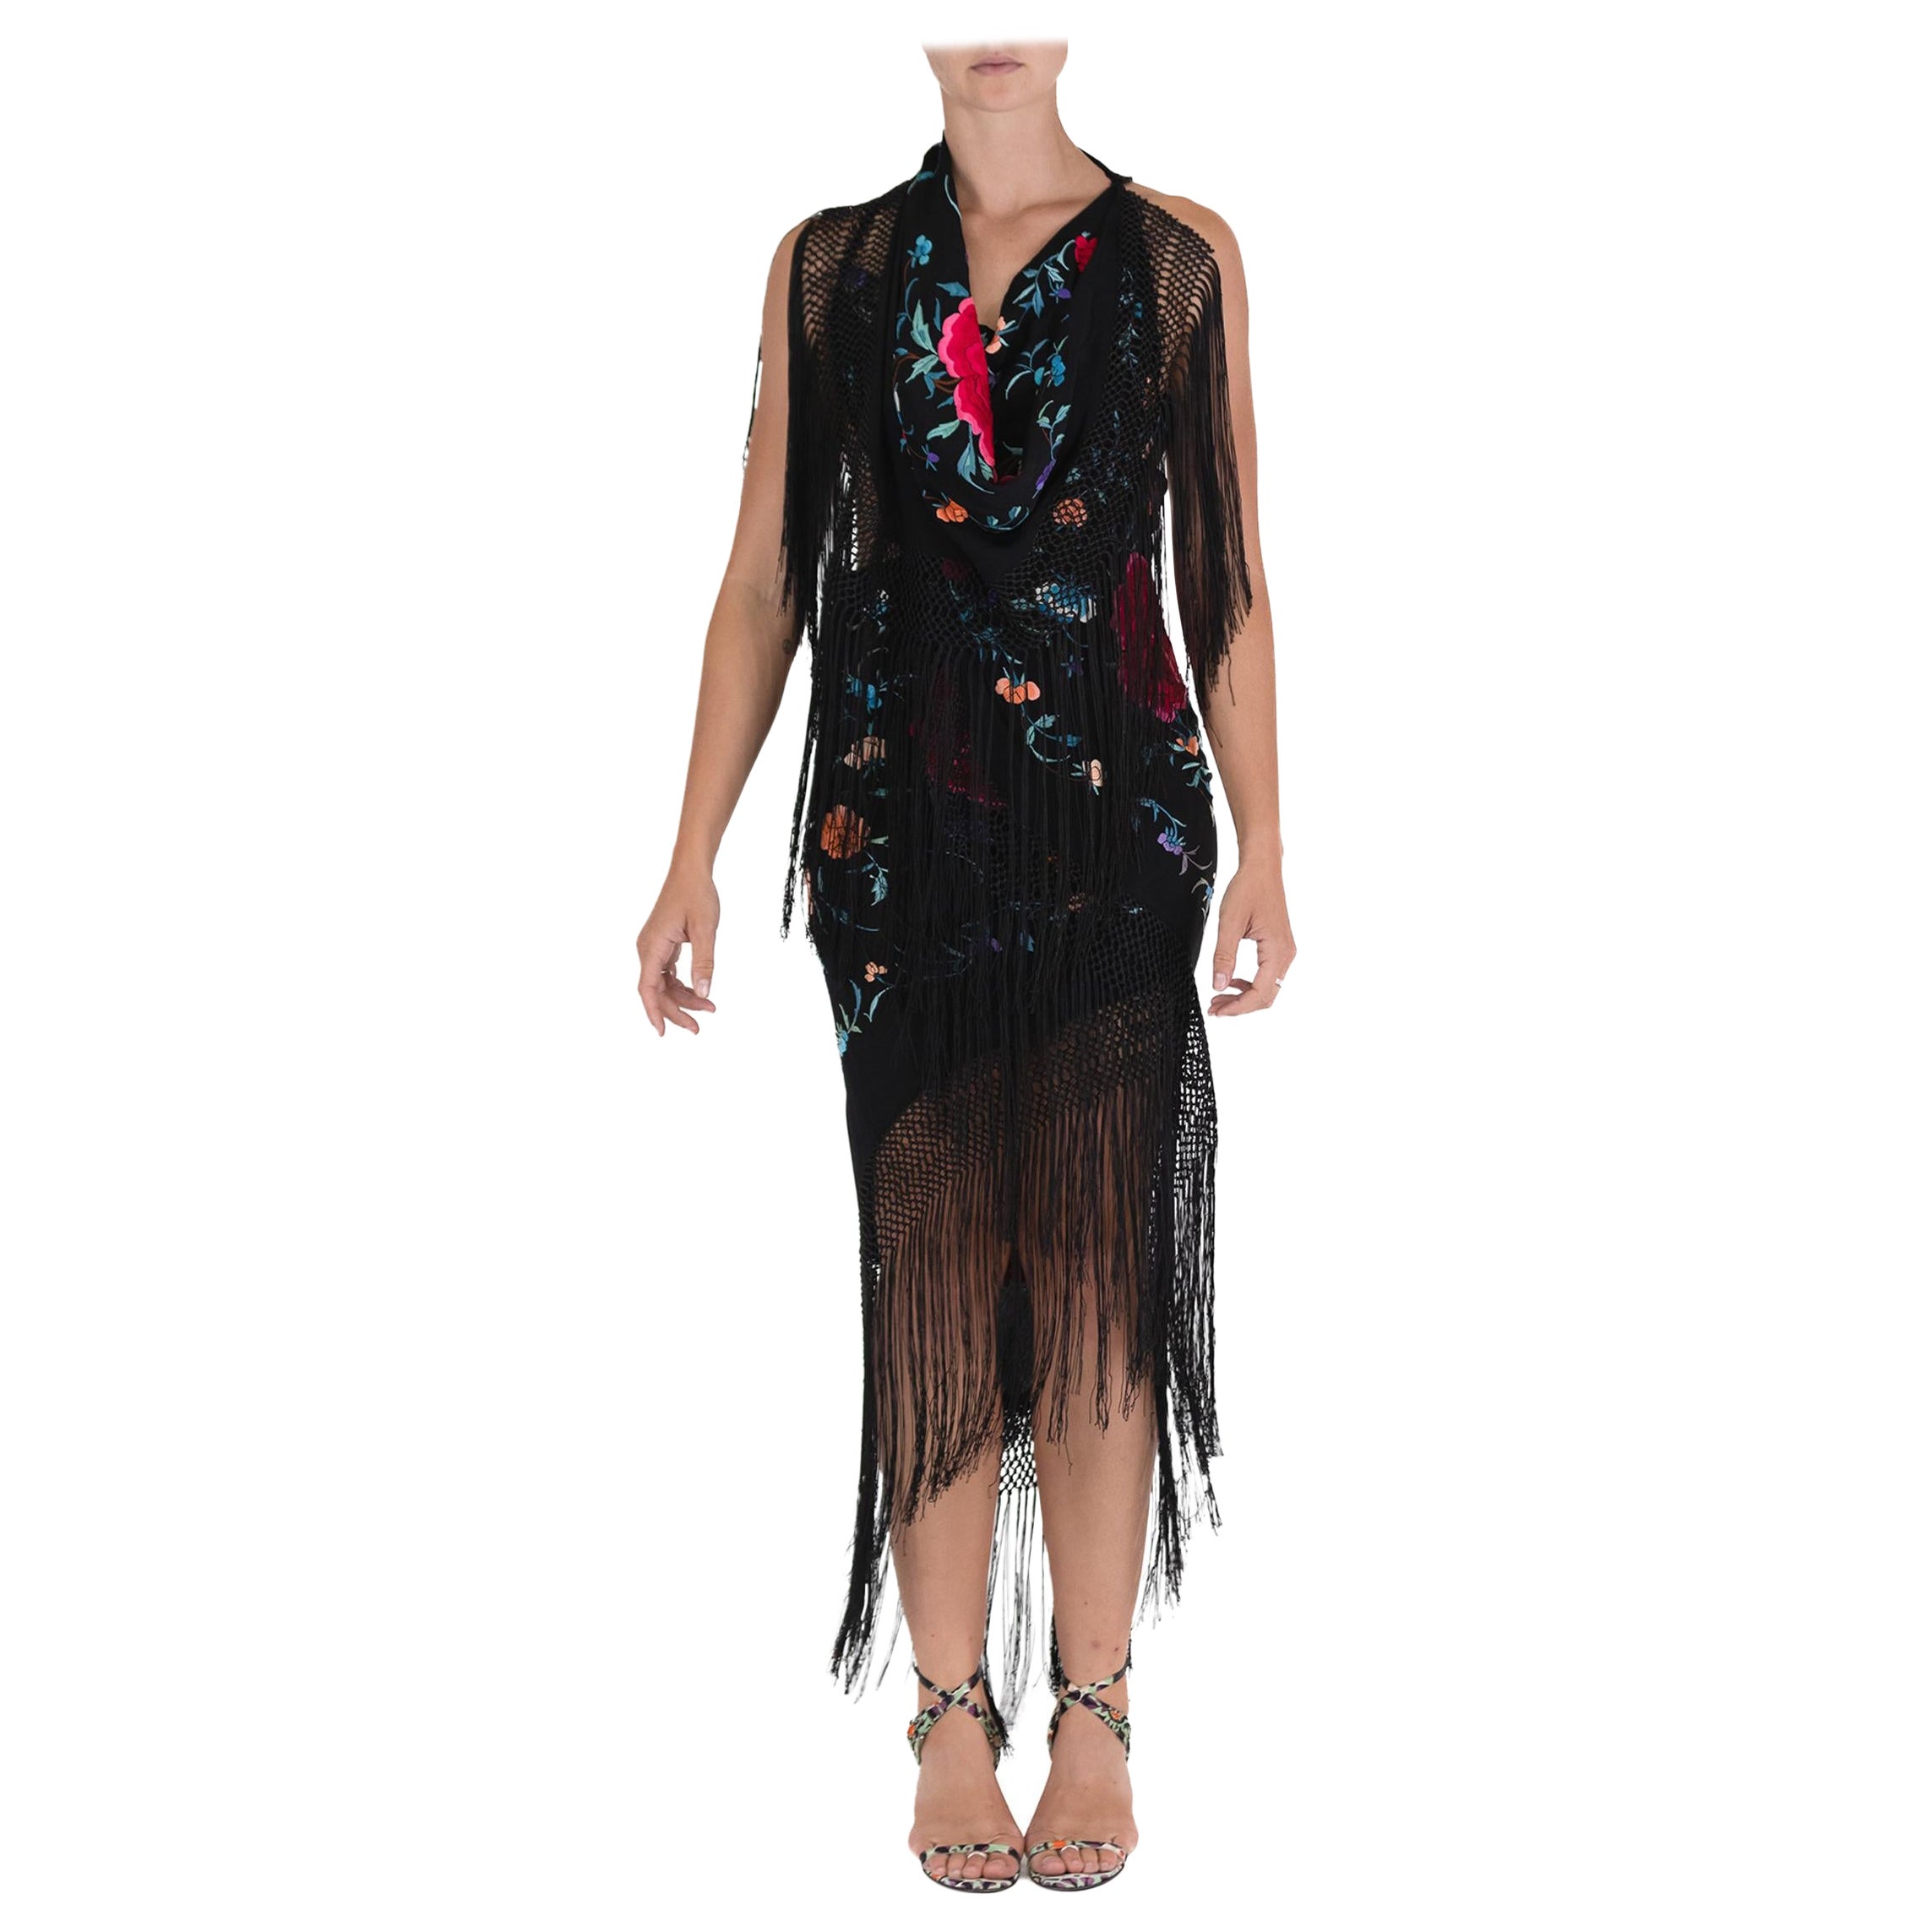 MORPHEW ATELIER Black Piano Shawl Dress With Pink And Blue Flower Embroidery For Sale